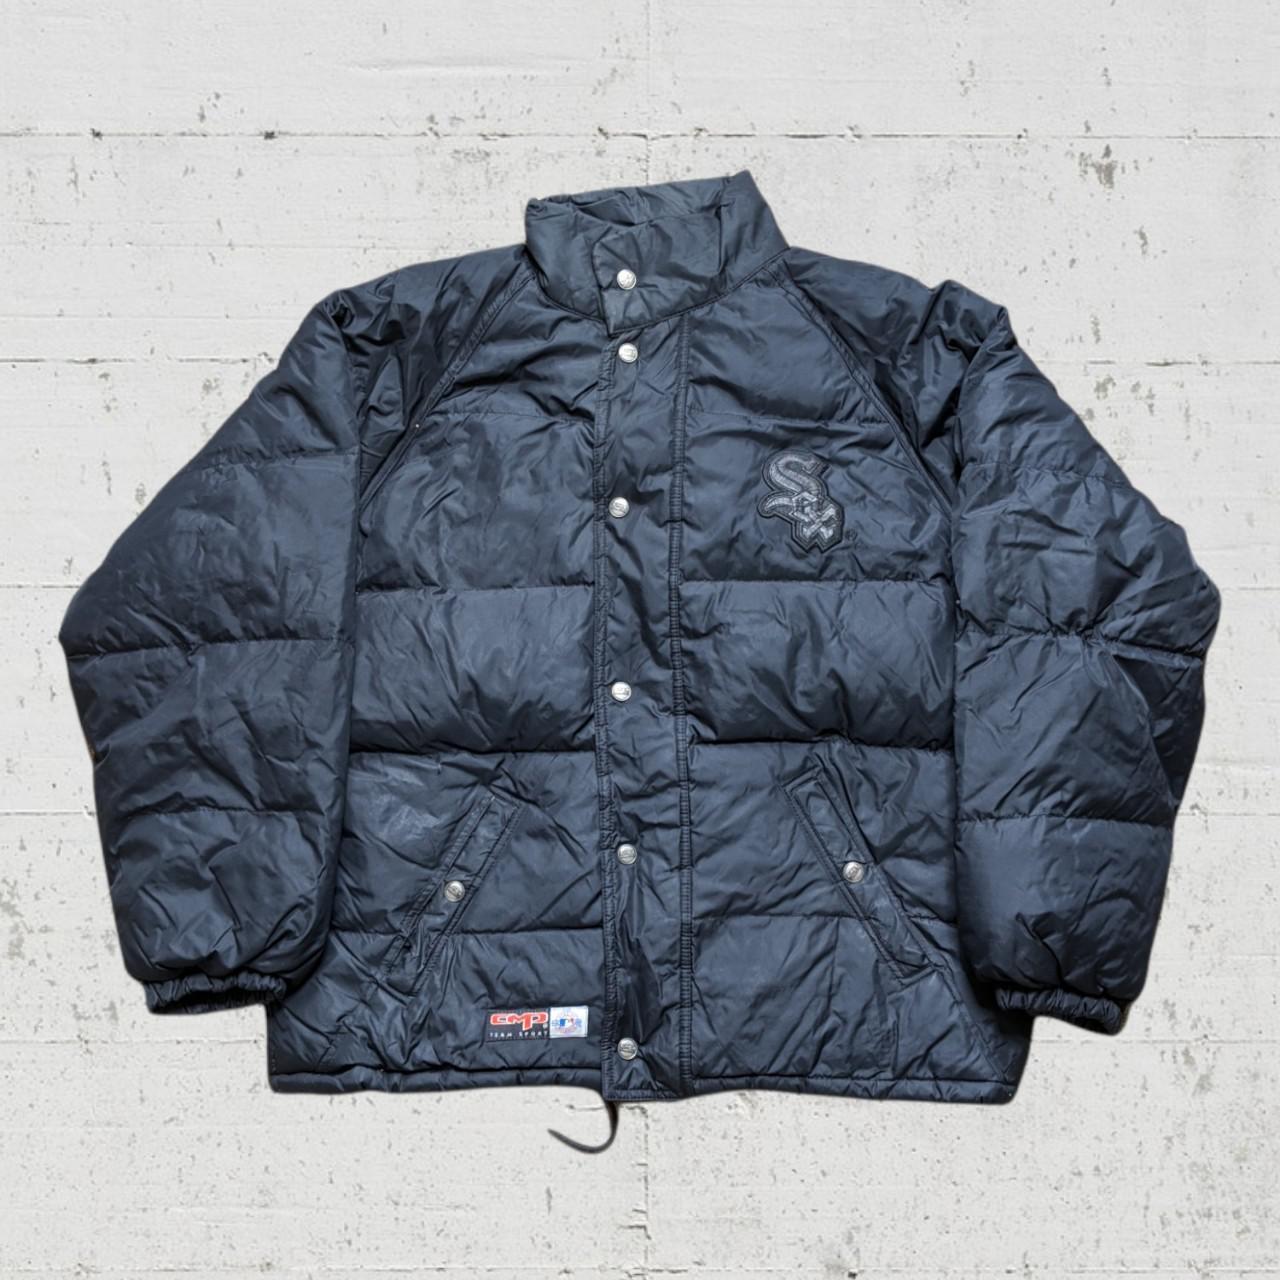 Product Image 1 - CMP Red Sox Puffer Jacket

Really